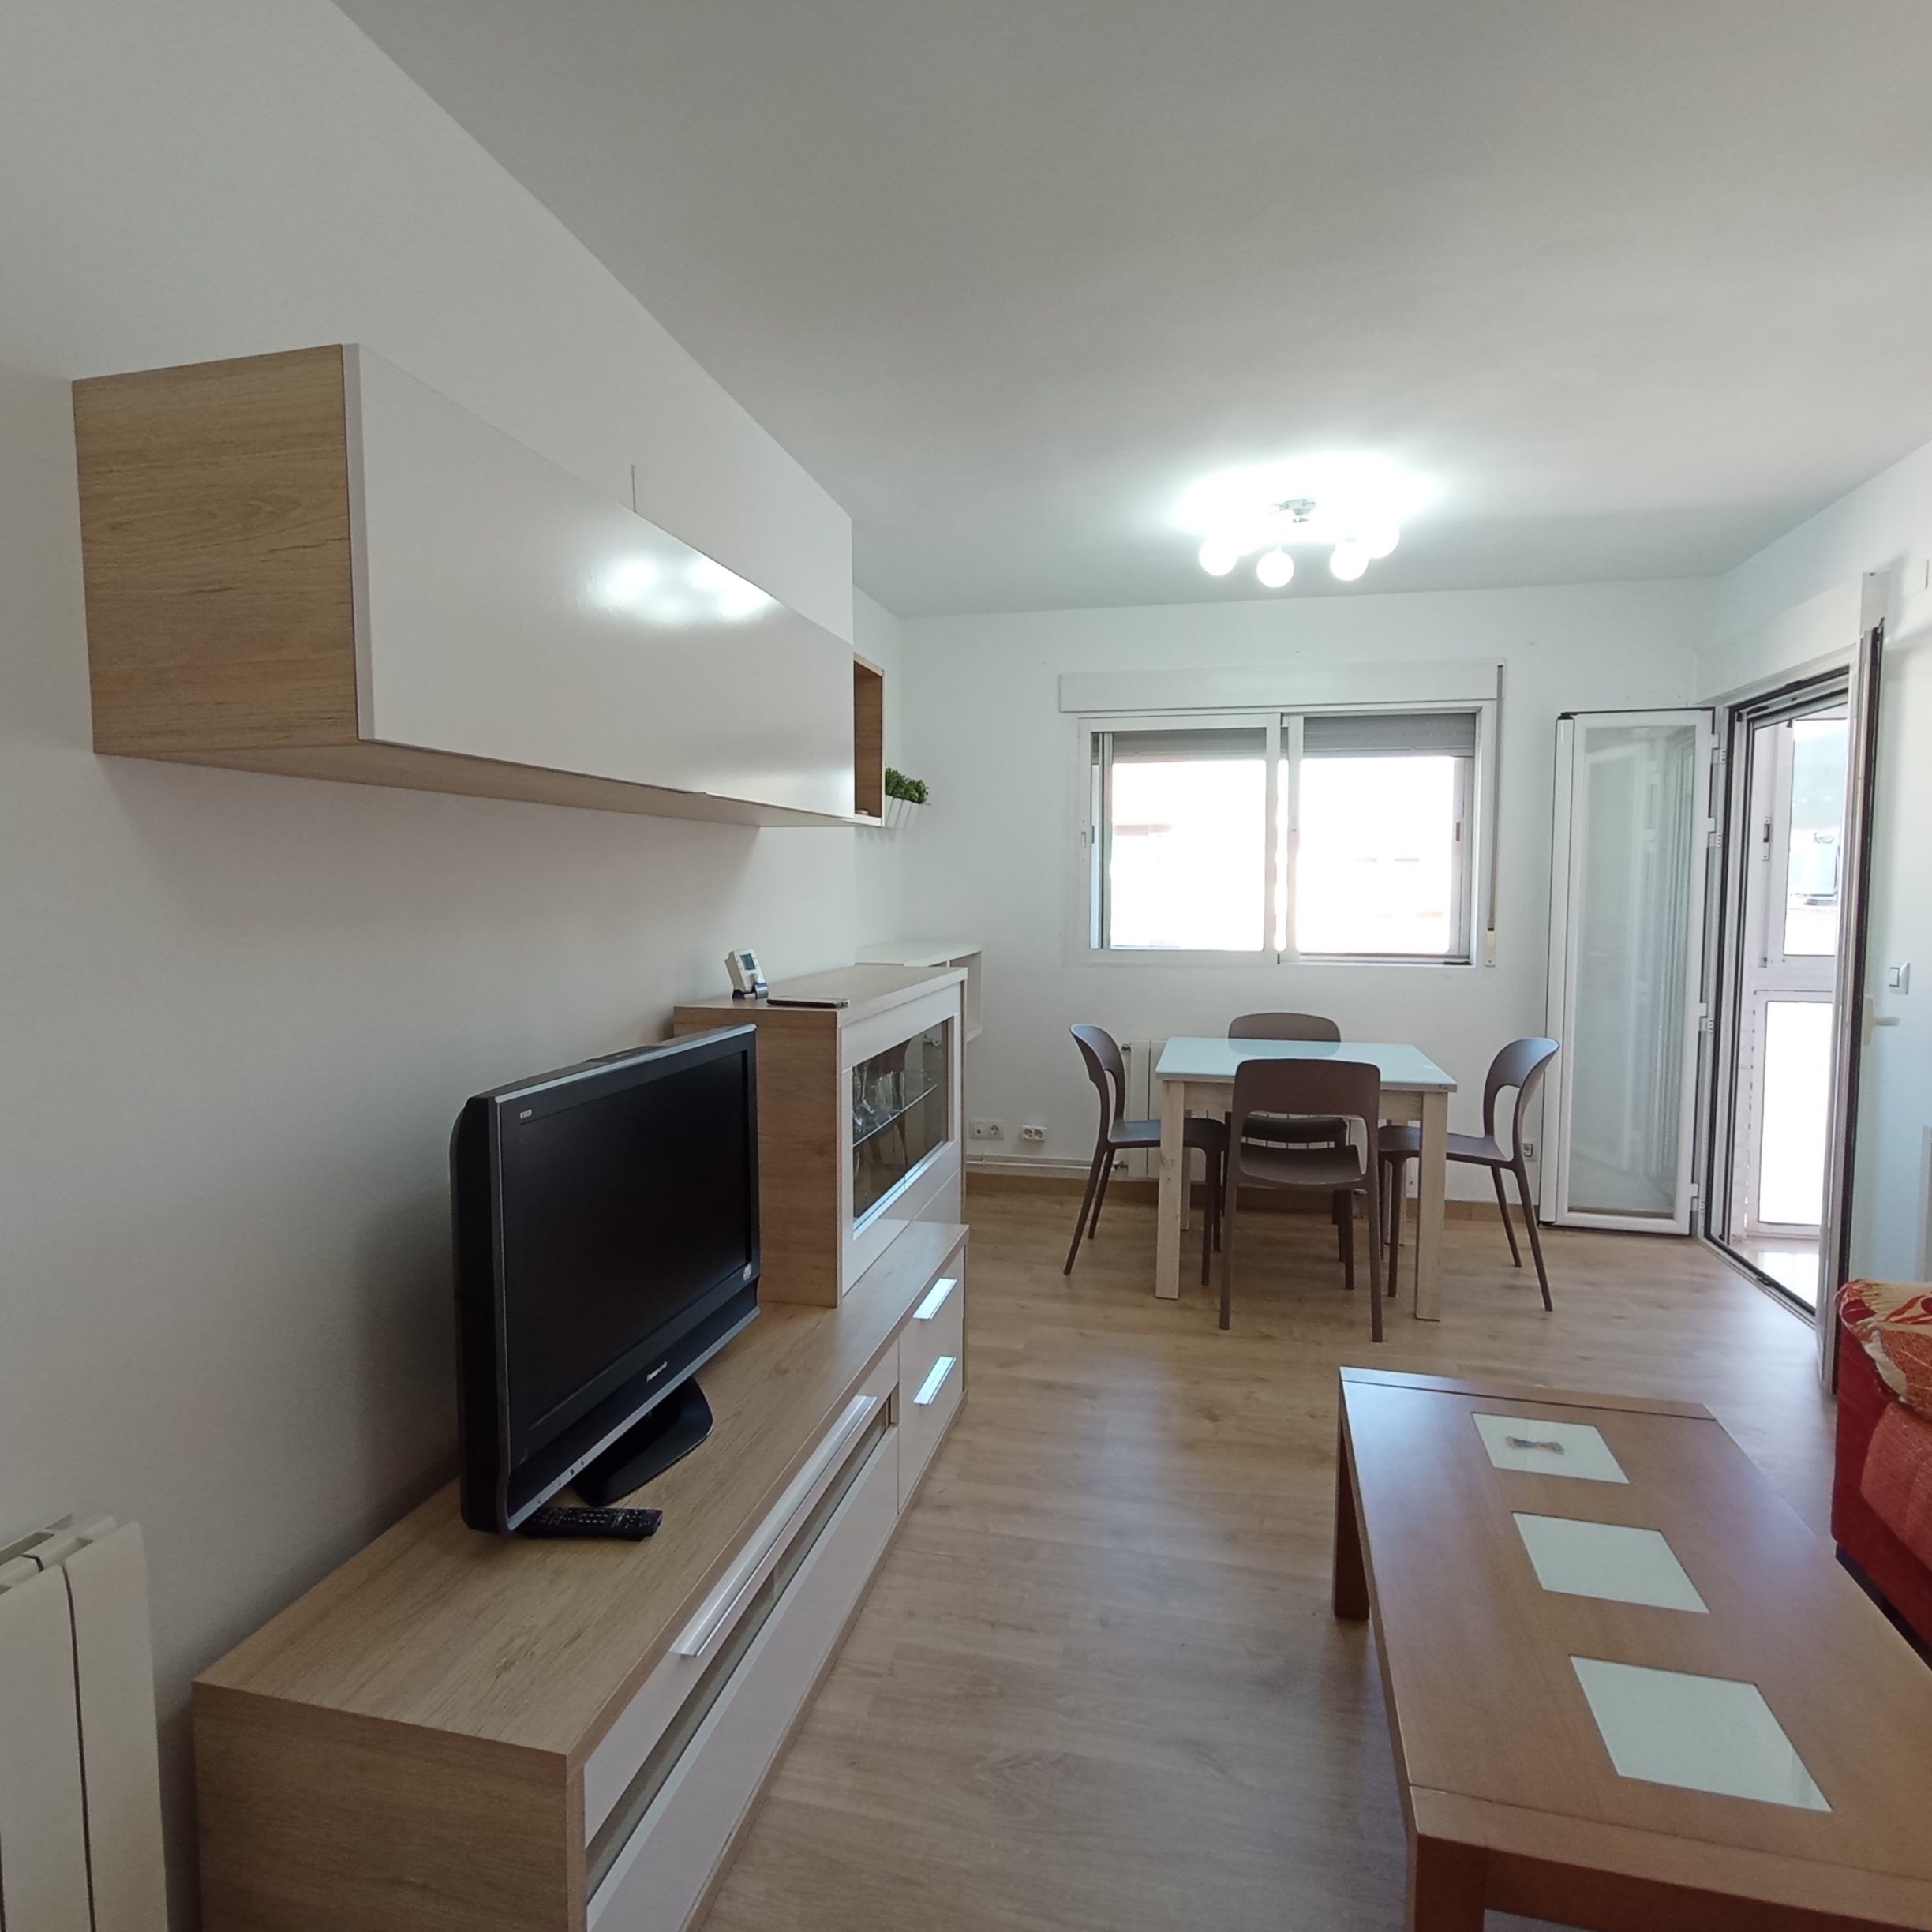 Escultor - 3 Bedroom apartment for rent in Valencia living room